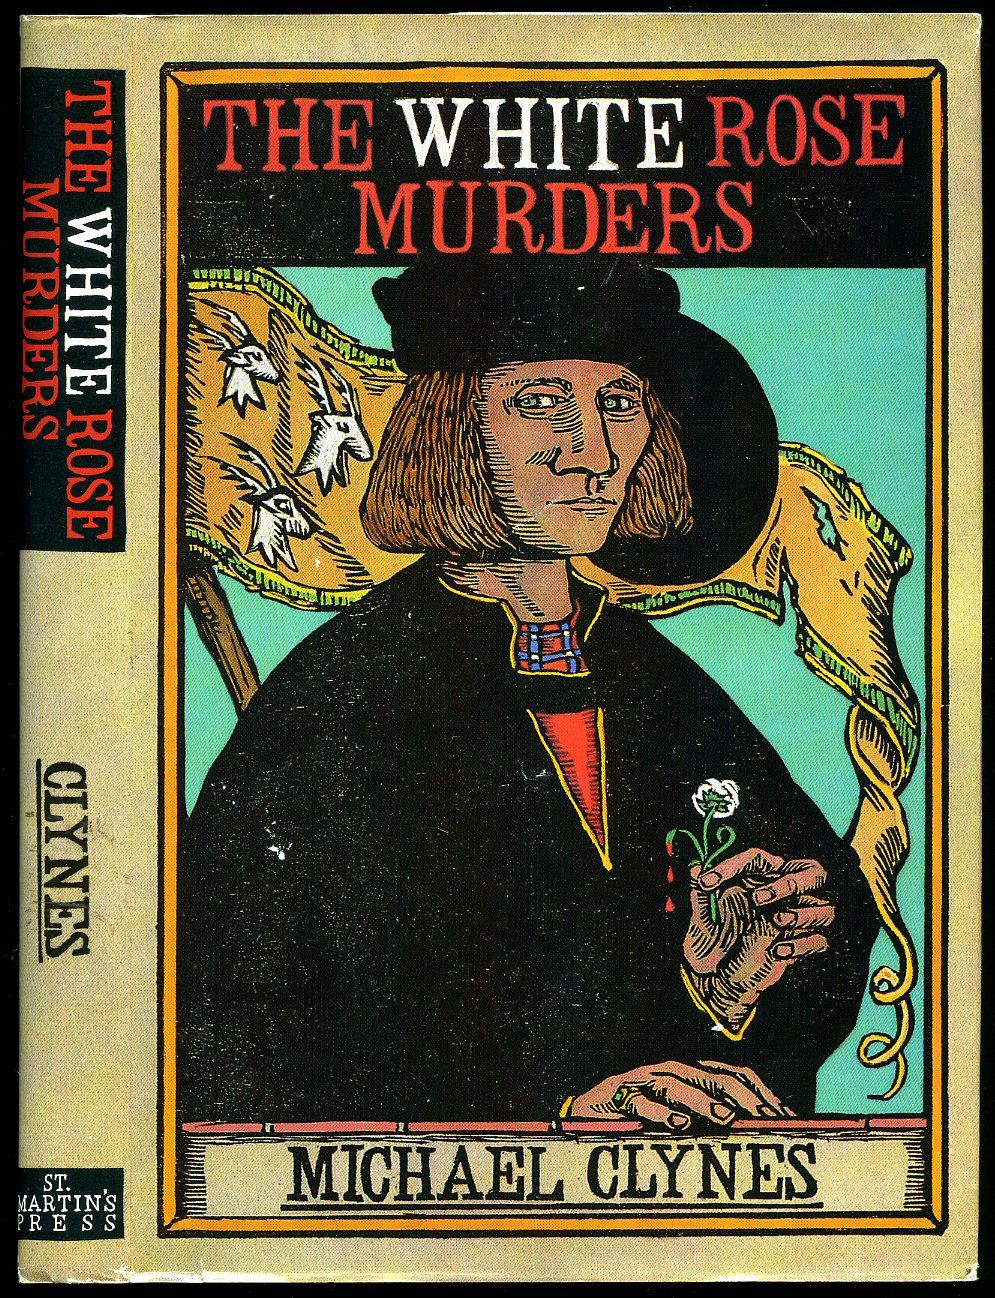 A Brood of Vipers: Being the Fourth Journal of Sir Roger Shallot Concerning Certain Wicked Conspiracies and Horrible Murders Perpetrated in the Reign of King Henry VIII by Michael Clynes (1996-01-03)